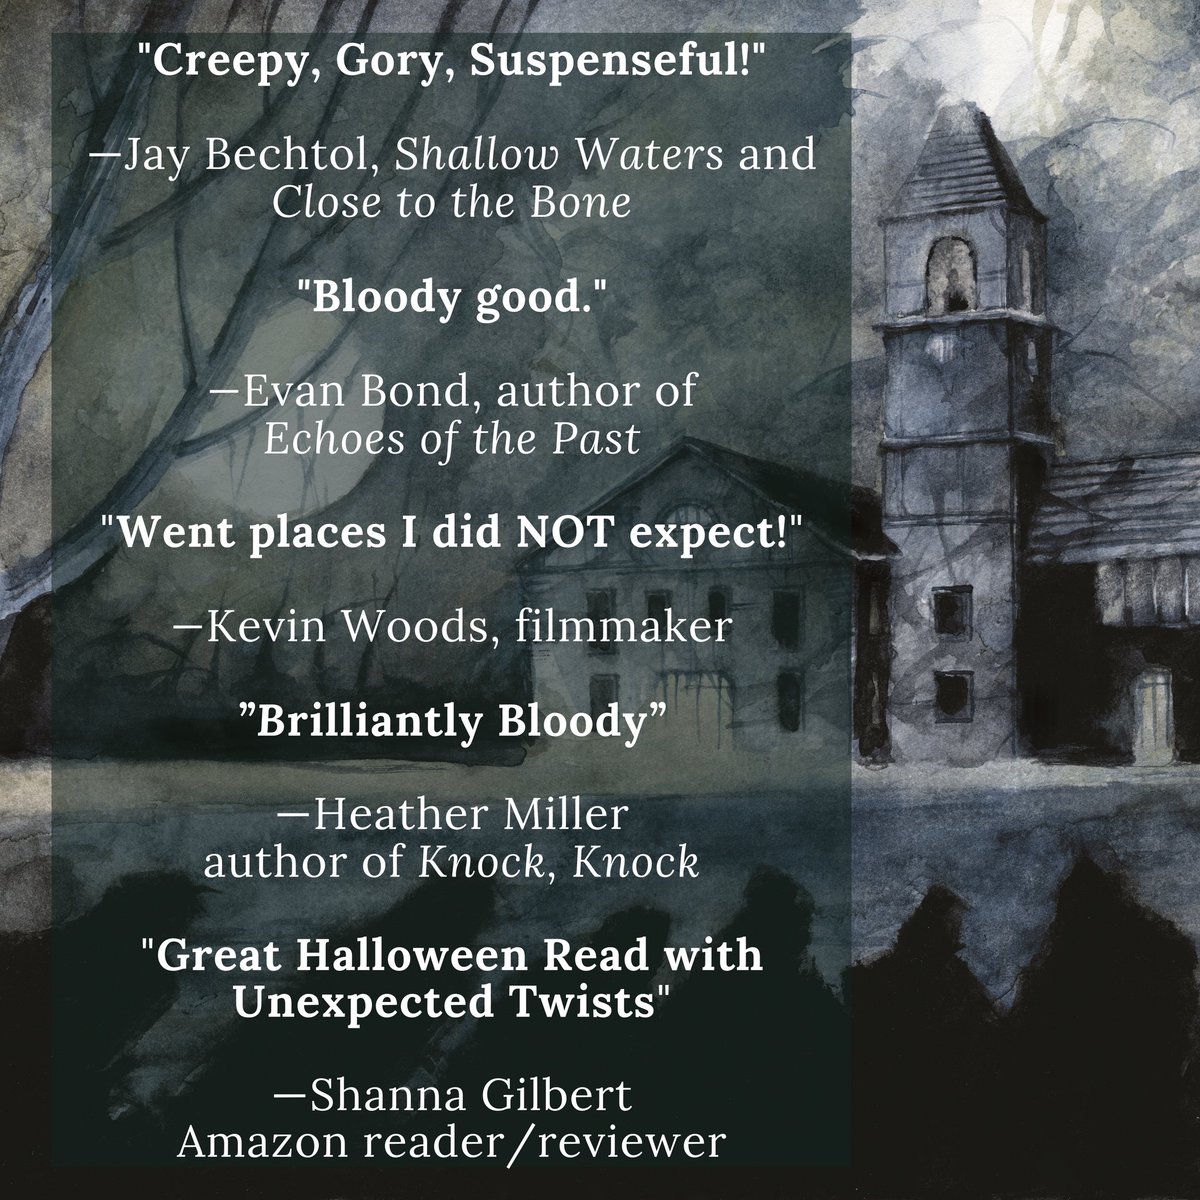 Always great to get reviews and I’m so thankful to those who do read and review my work. Hell Night in Hopewell, a Halloween read for this October. Check it out. #Hellnightinhopewell #octoberreads #halloweenread #halloweentbr #readthisbook #tbr #imscared